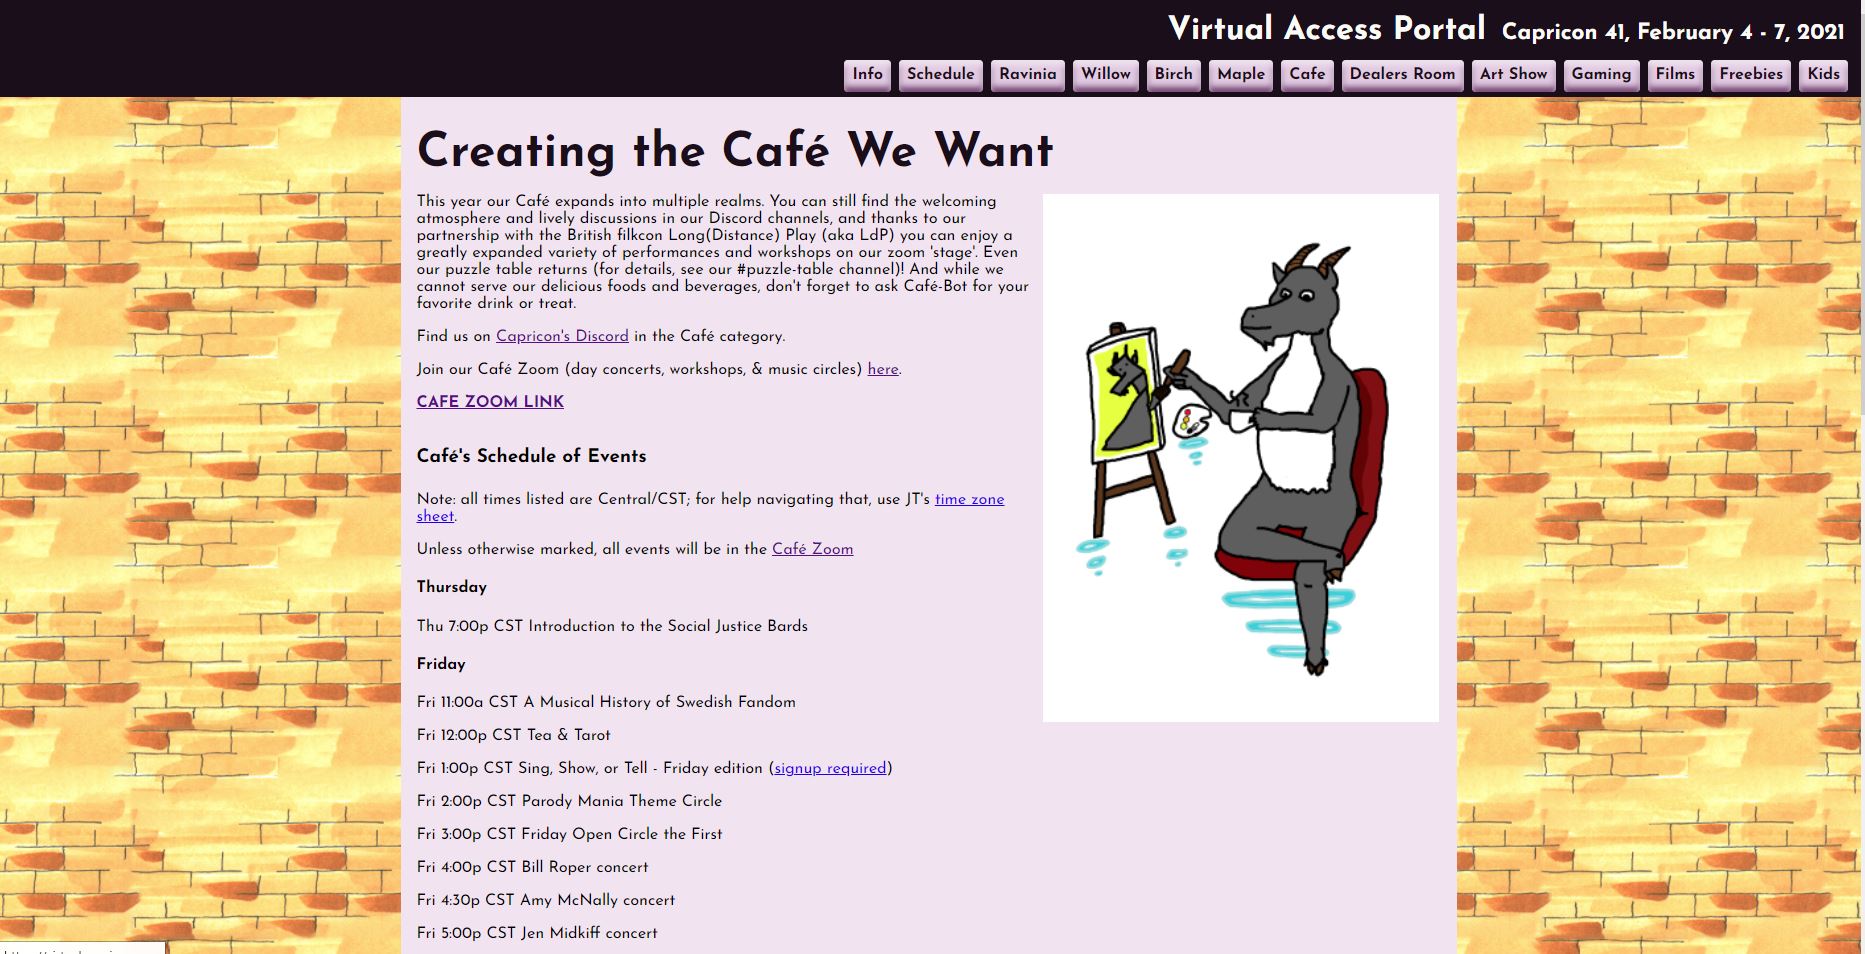 Screenshot from website. In top it states 'Virtual Access Portal Capricon 41, February 4-7, 2021'. Below is the menu and under it the page itself. In the background there is a picture of the brick wall. The page shows title 'Creating the Cafe We Want', picture of the goat painting something, and a lot of text.